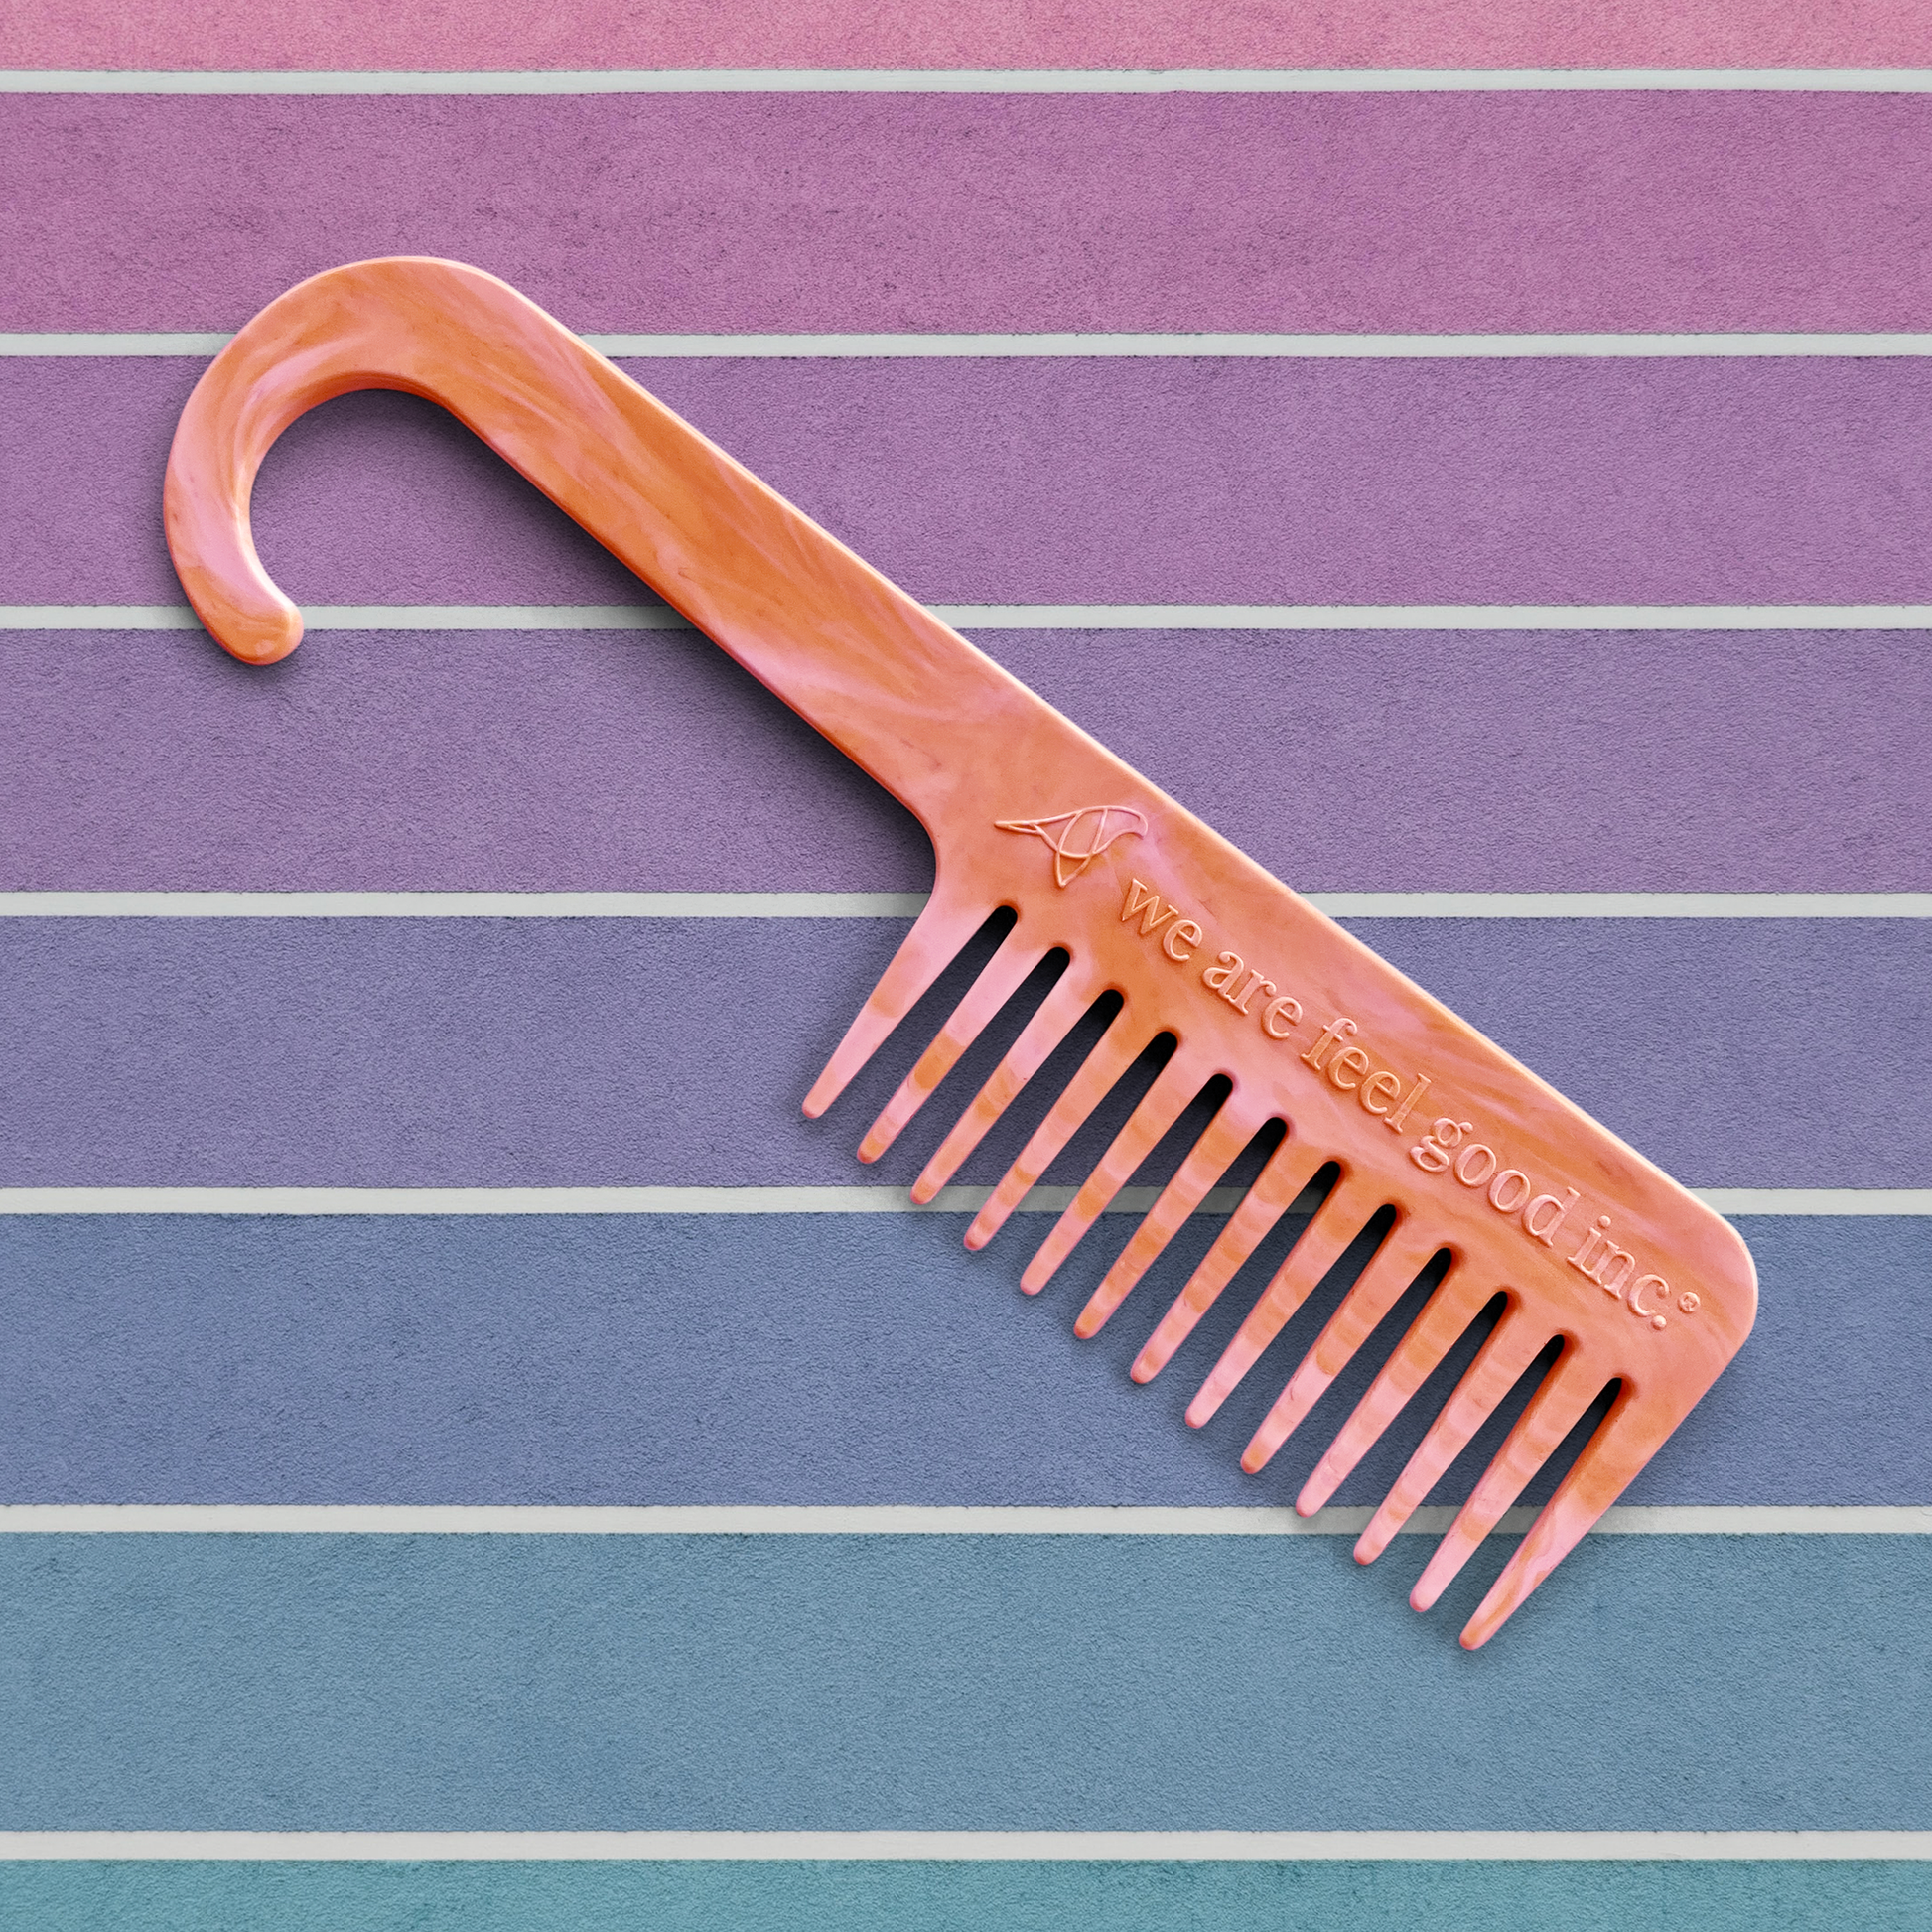 100% reclaimed / recycled plastic - shower comb made from bottle tops / caps